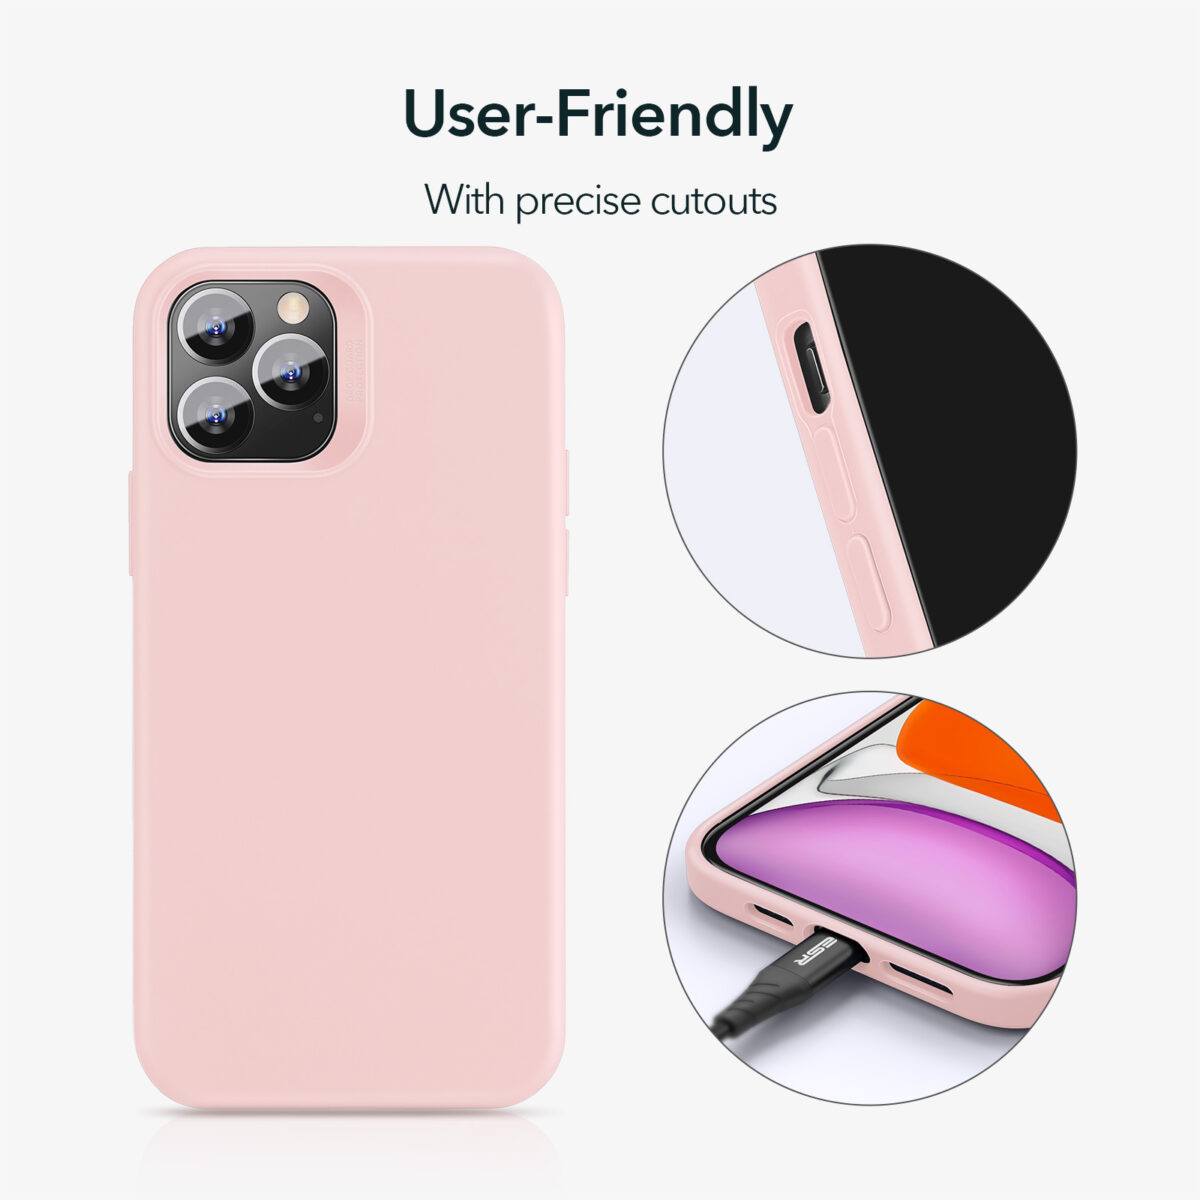 ESR Soft Silicone Case with precise cutouts Sand Pink for iPhone 12